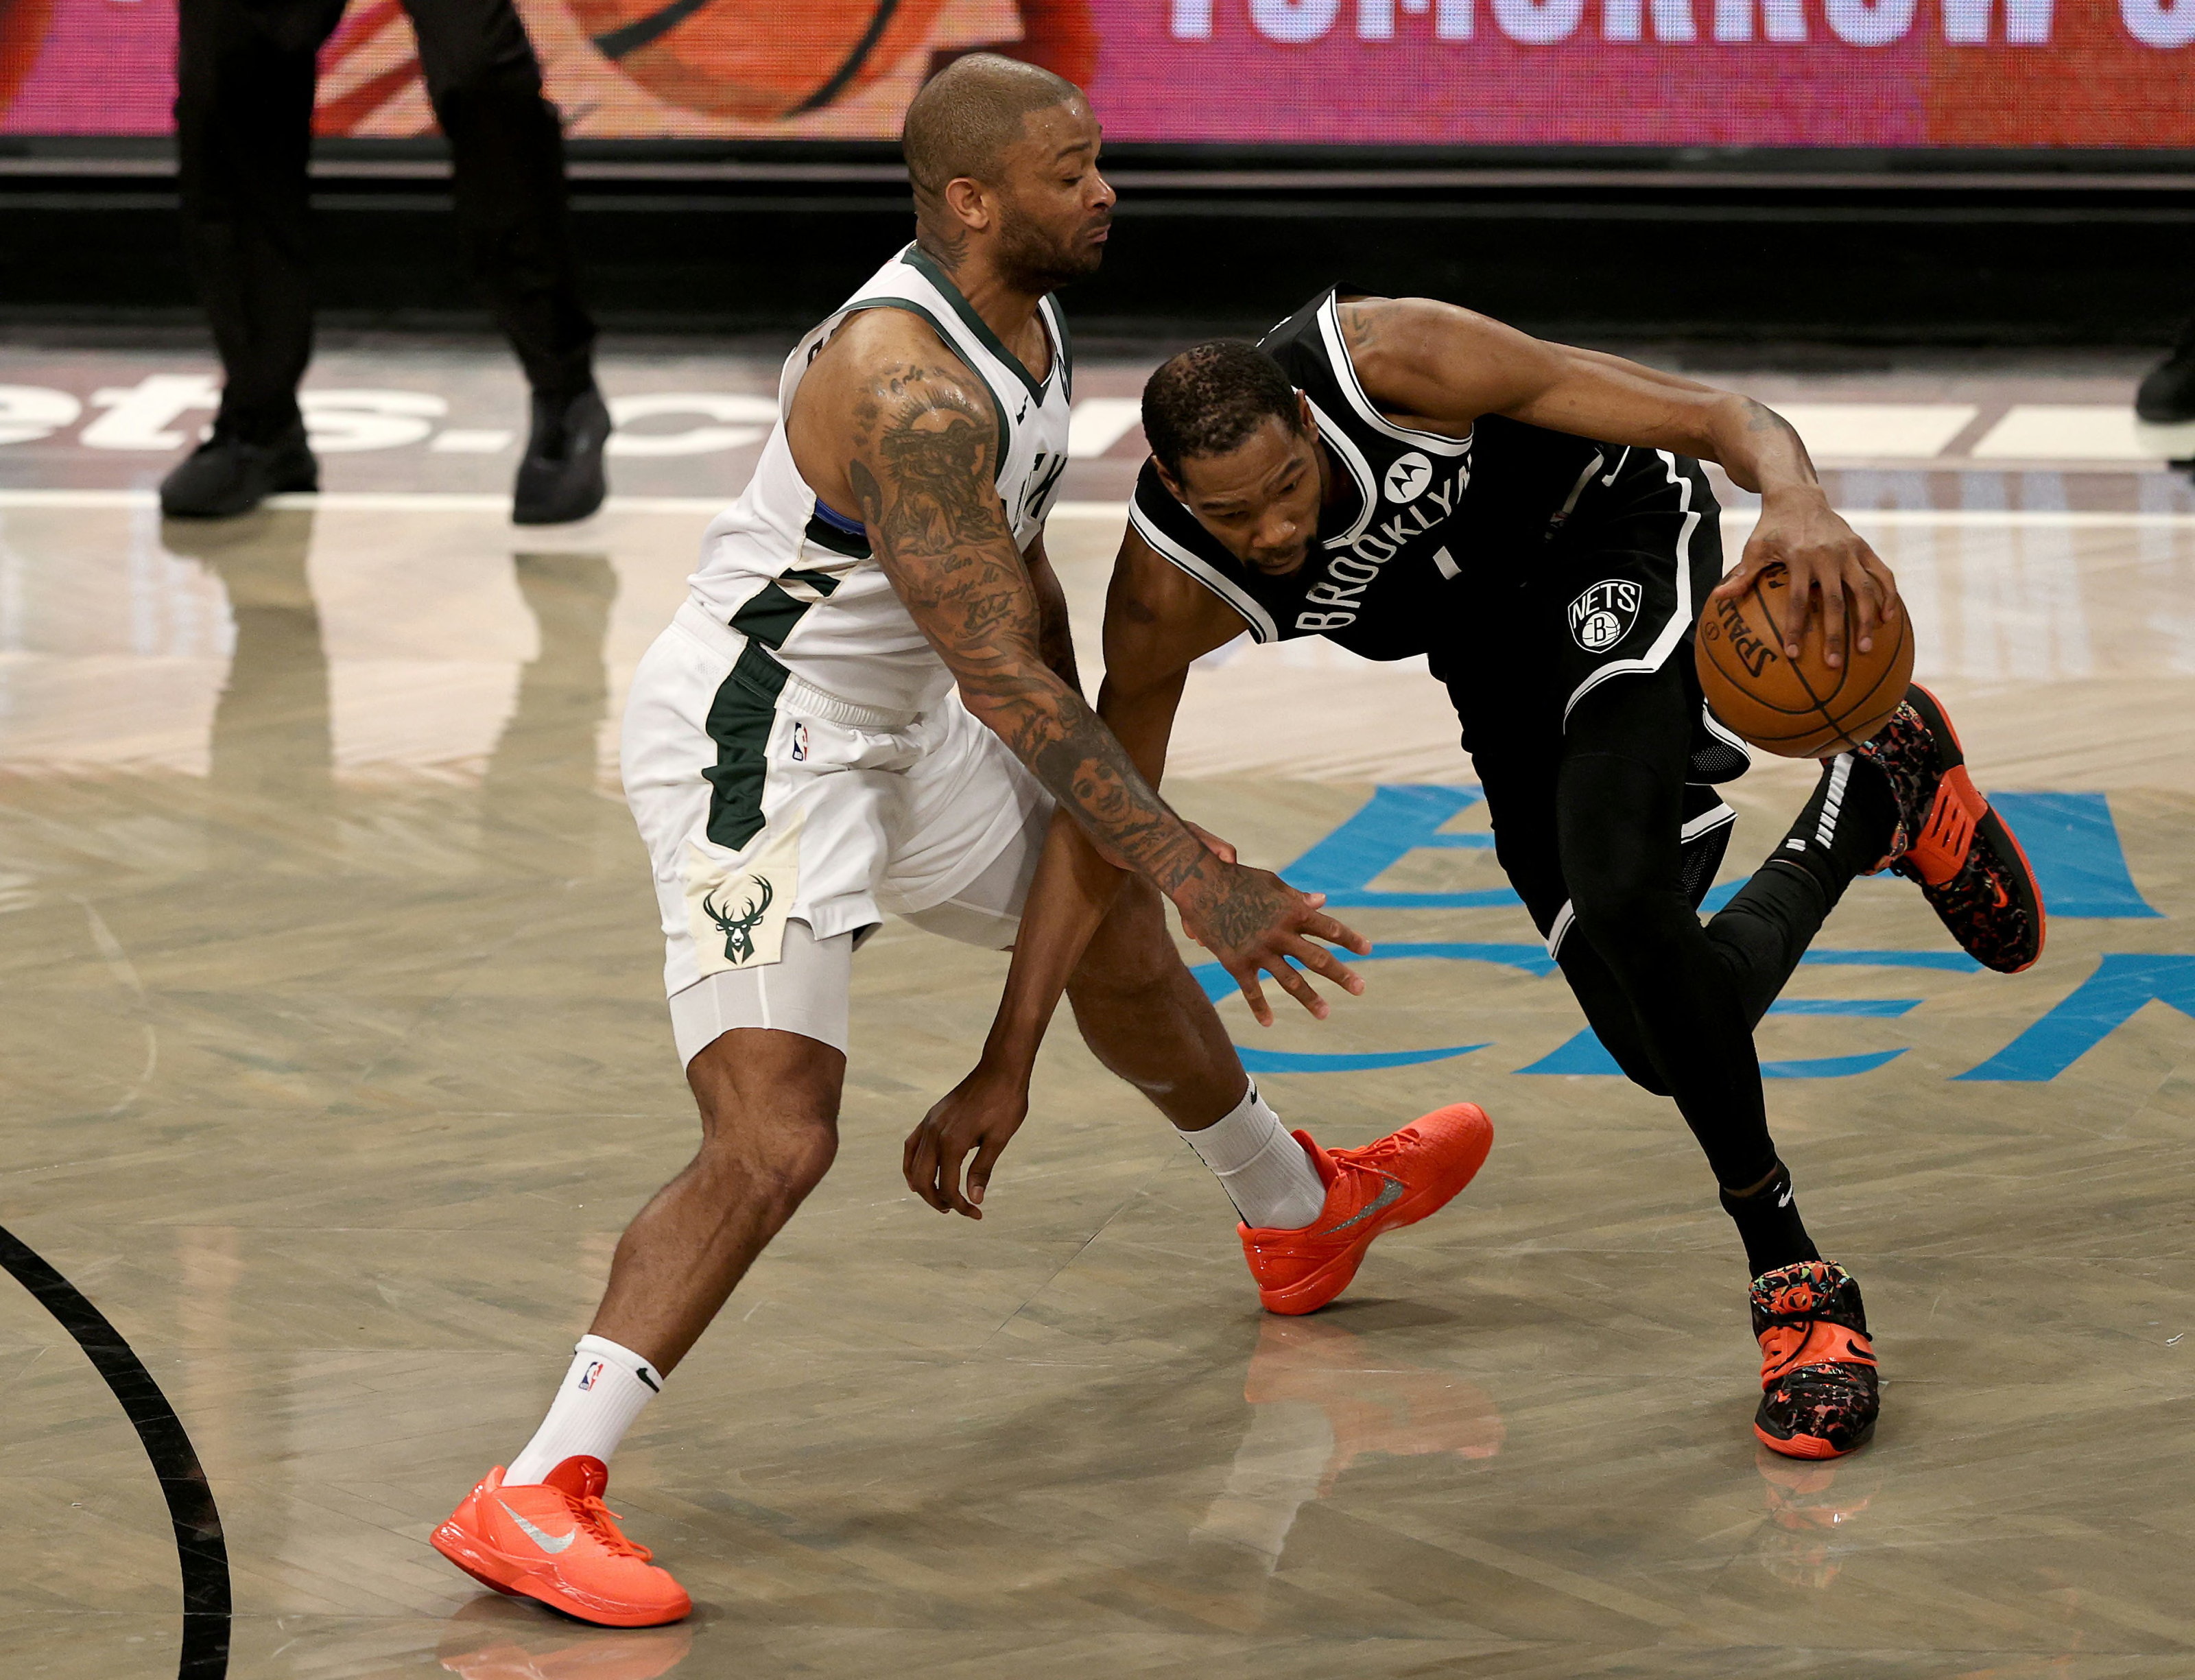 Miami Heat: Why P.J. Tucker is not the answer at power forward